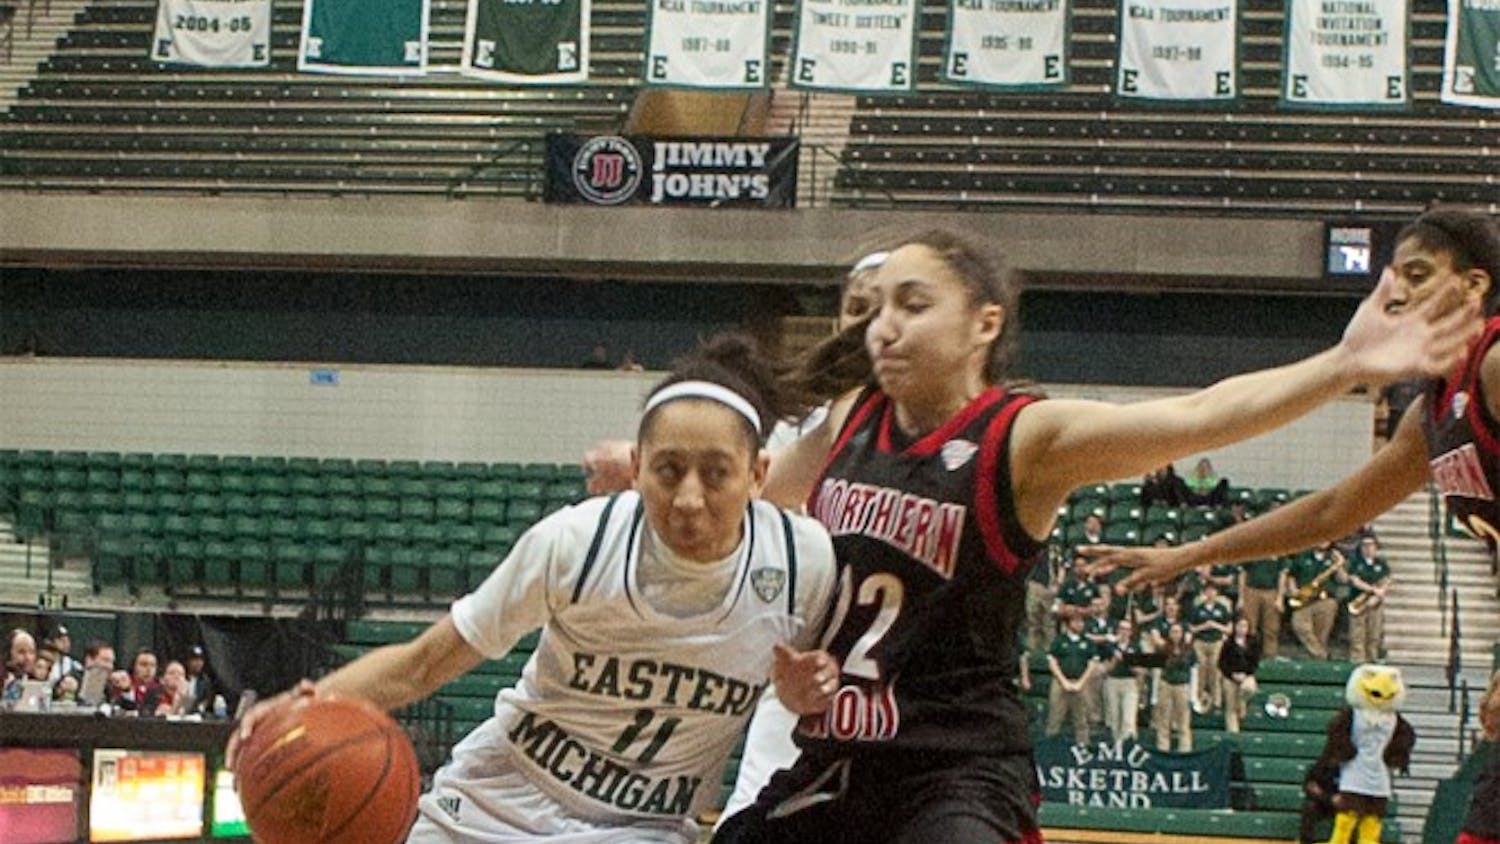 Eastern Michigan guard Desyree Thomas pushes her way around the defense during the Eagles' 76-81 overtime loss to Northern Illinois on 10 March at the Convocation Center.